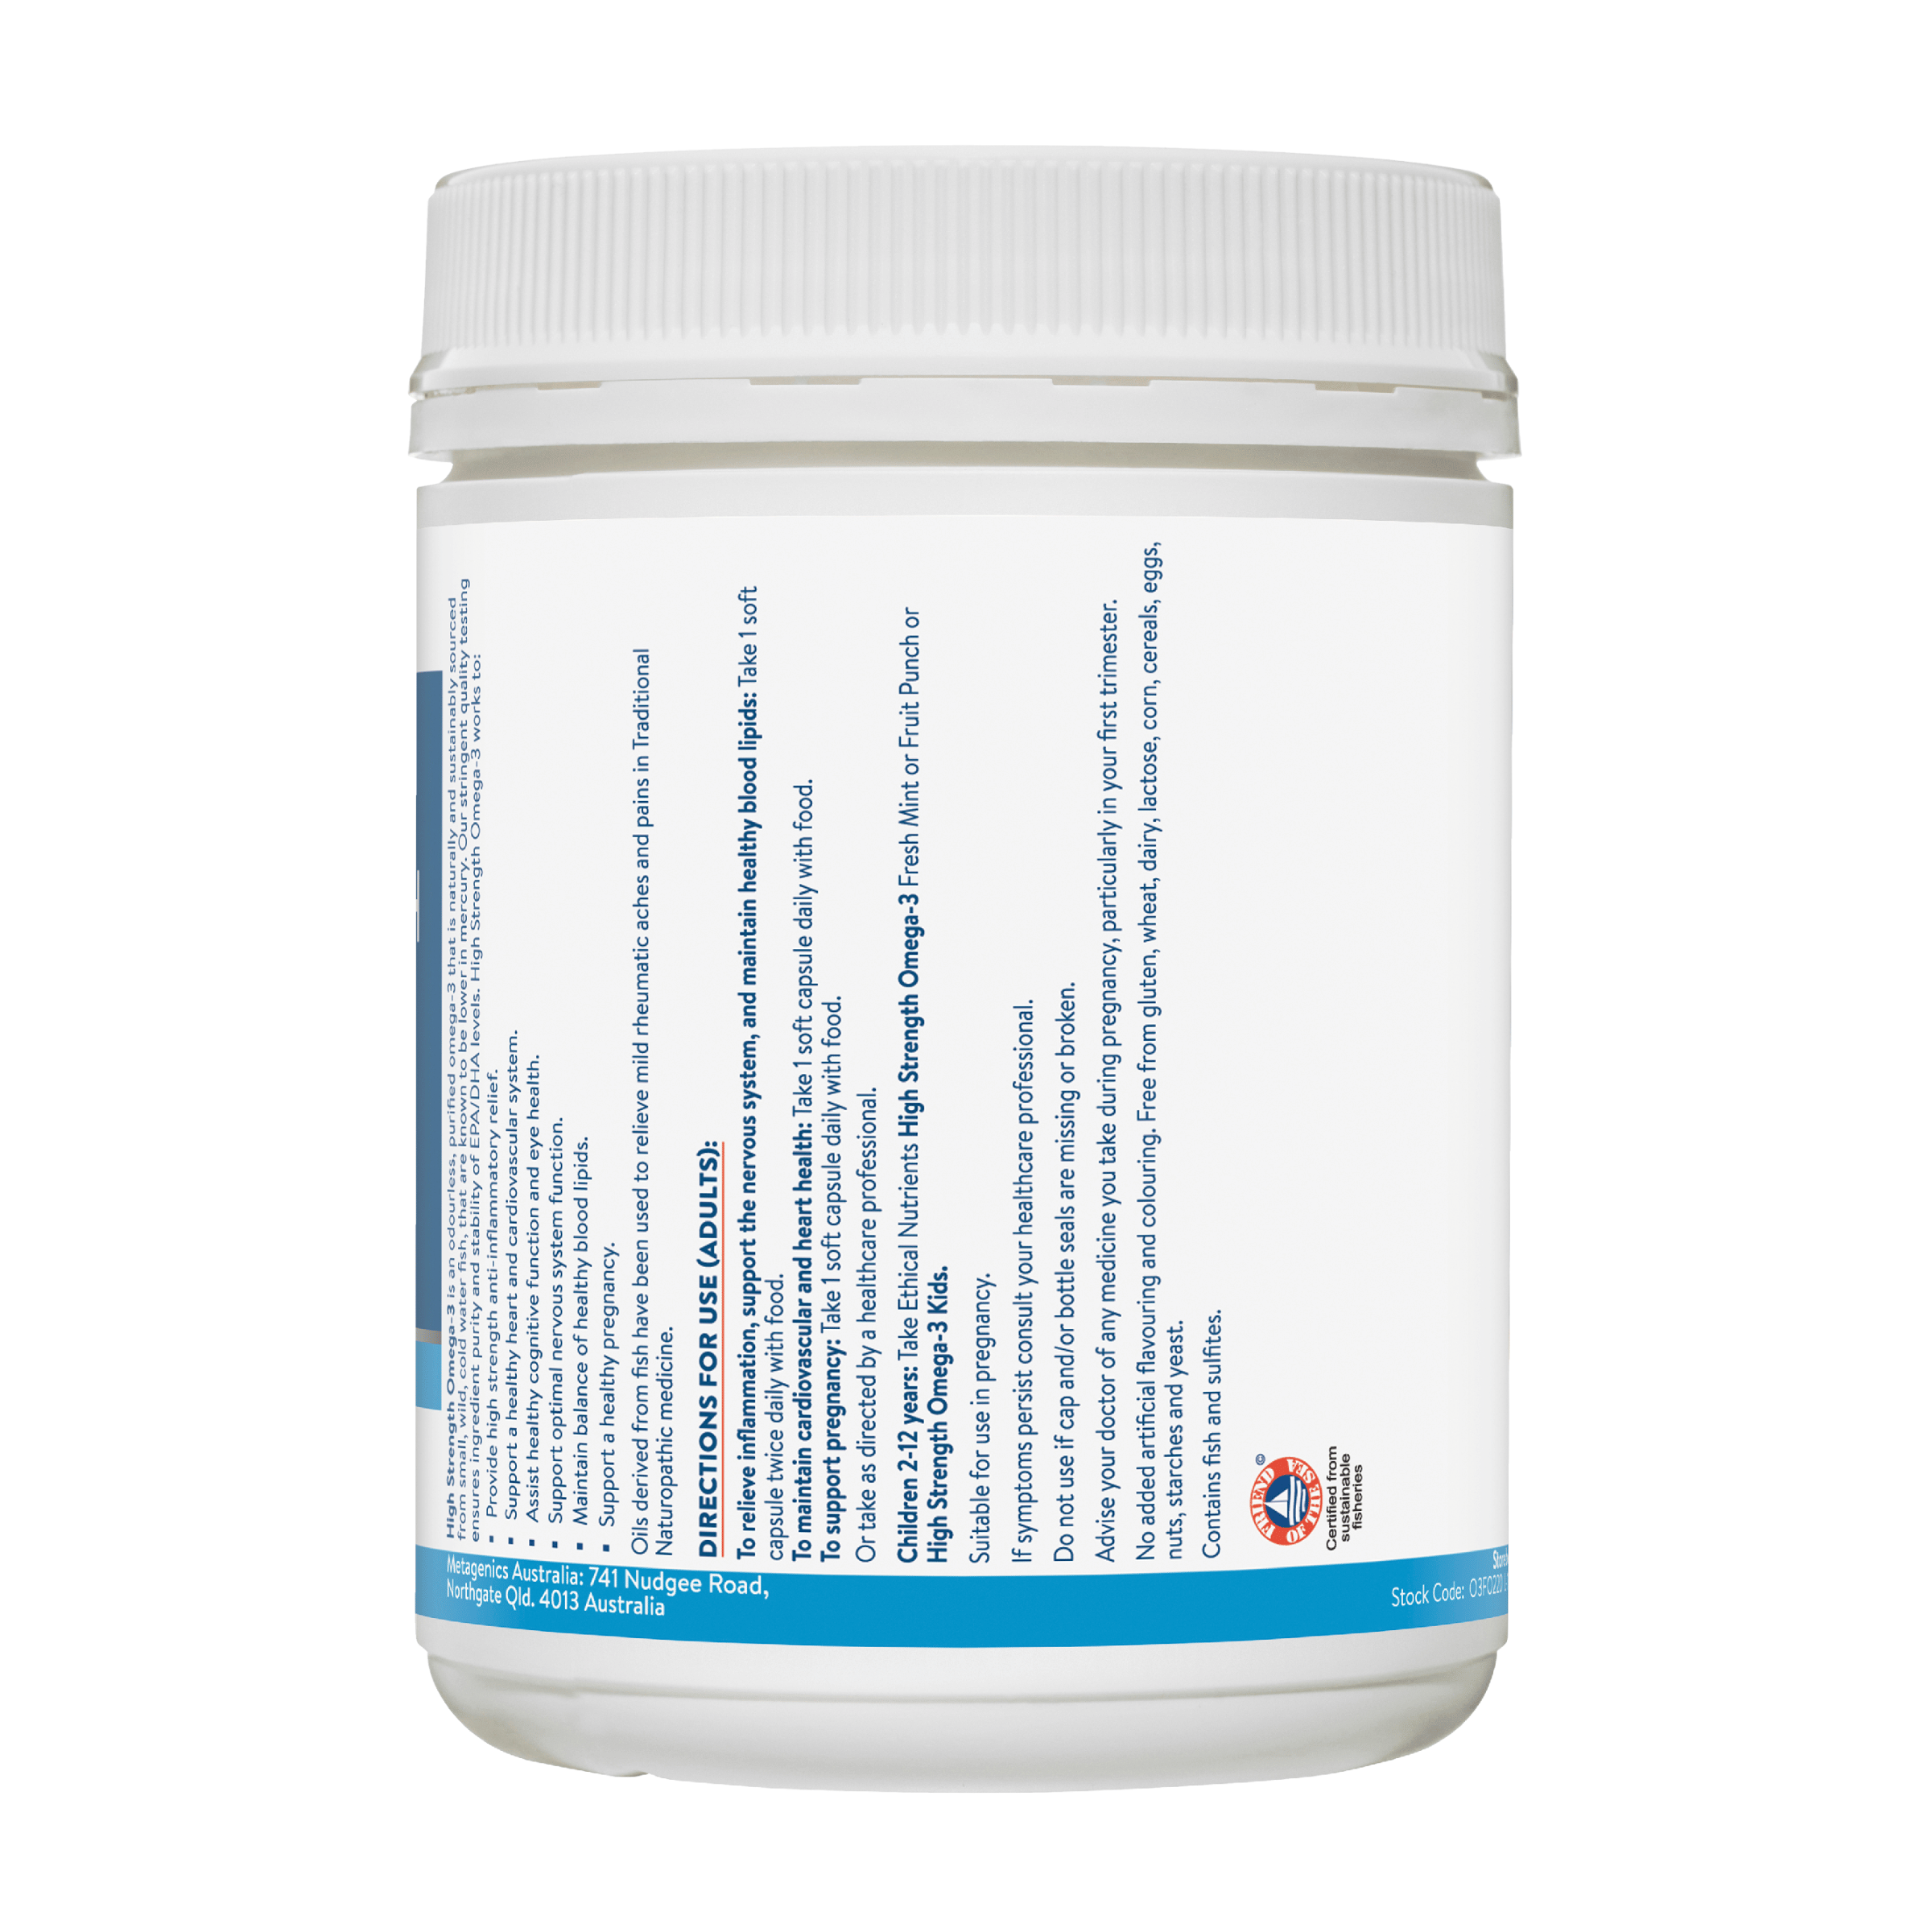 Ethical Nutrients High Strength Omega-3 220 Capsules #size_220 soft capsules